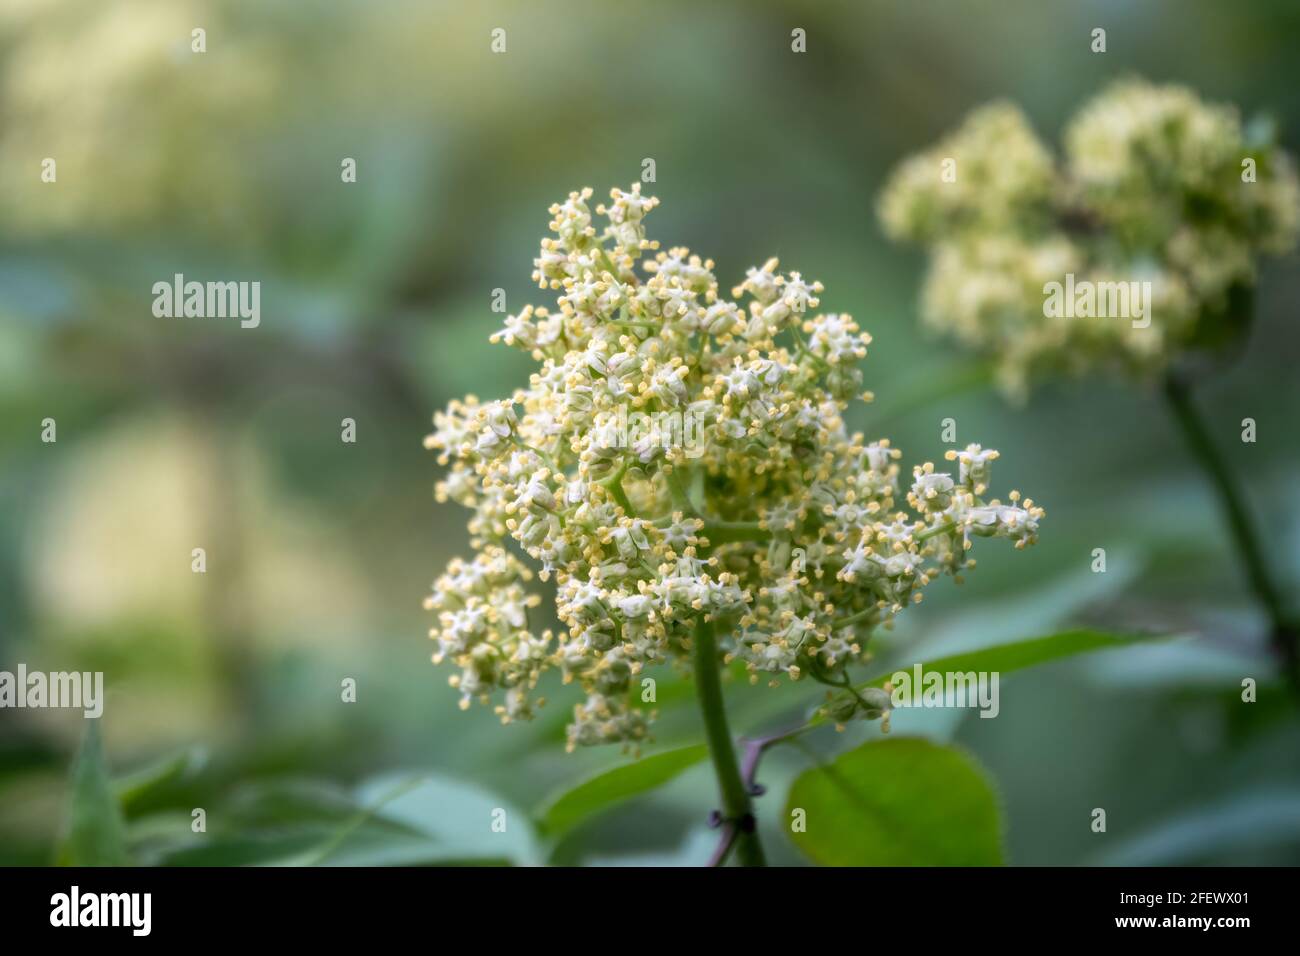 Elderberry buds Black and White Stock Photos & Images - Alamy